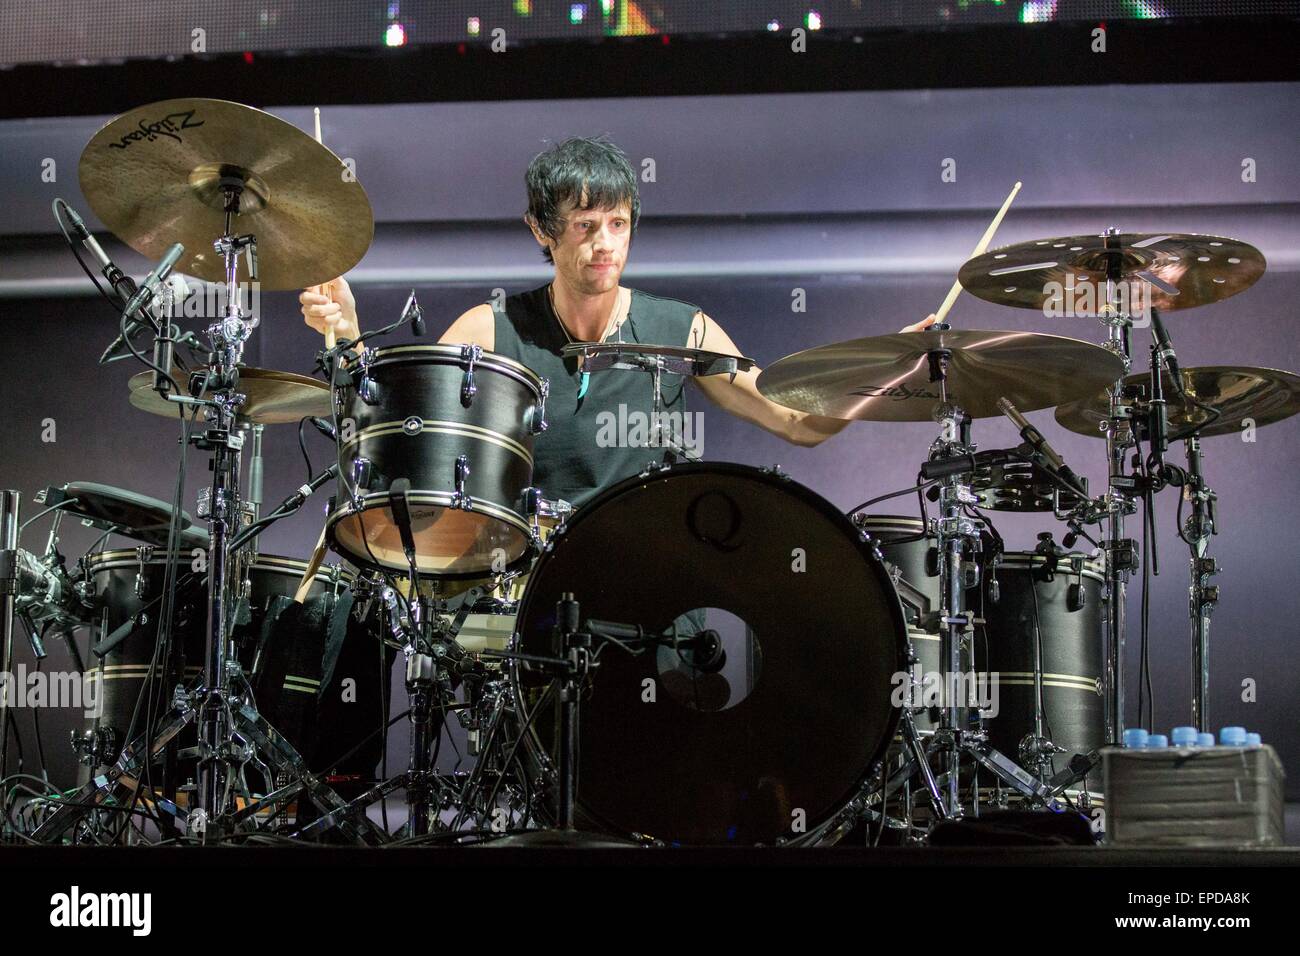 Irvine, California, USA. 17th May, 2015. Drummer DOMINIC HOWARD of Muse  performs live during the KROQ Weenie Roast Y Fiesta at Irvine Meadows  Amphitheatre in Irvine, California Credit: Daniel DeSlover/ZUMA Wire/Alamy  Live